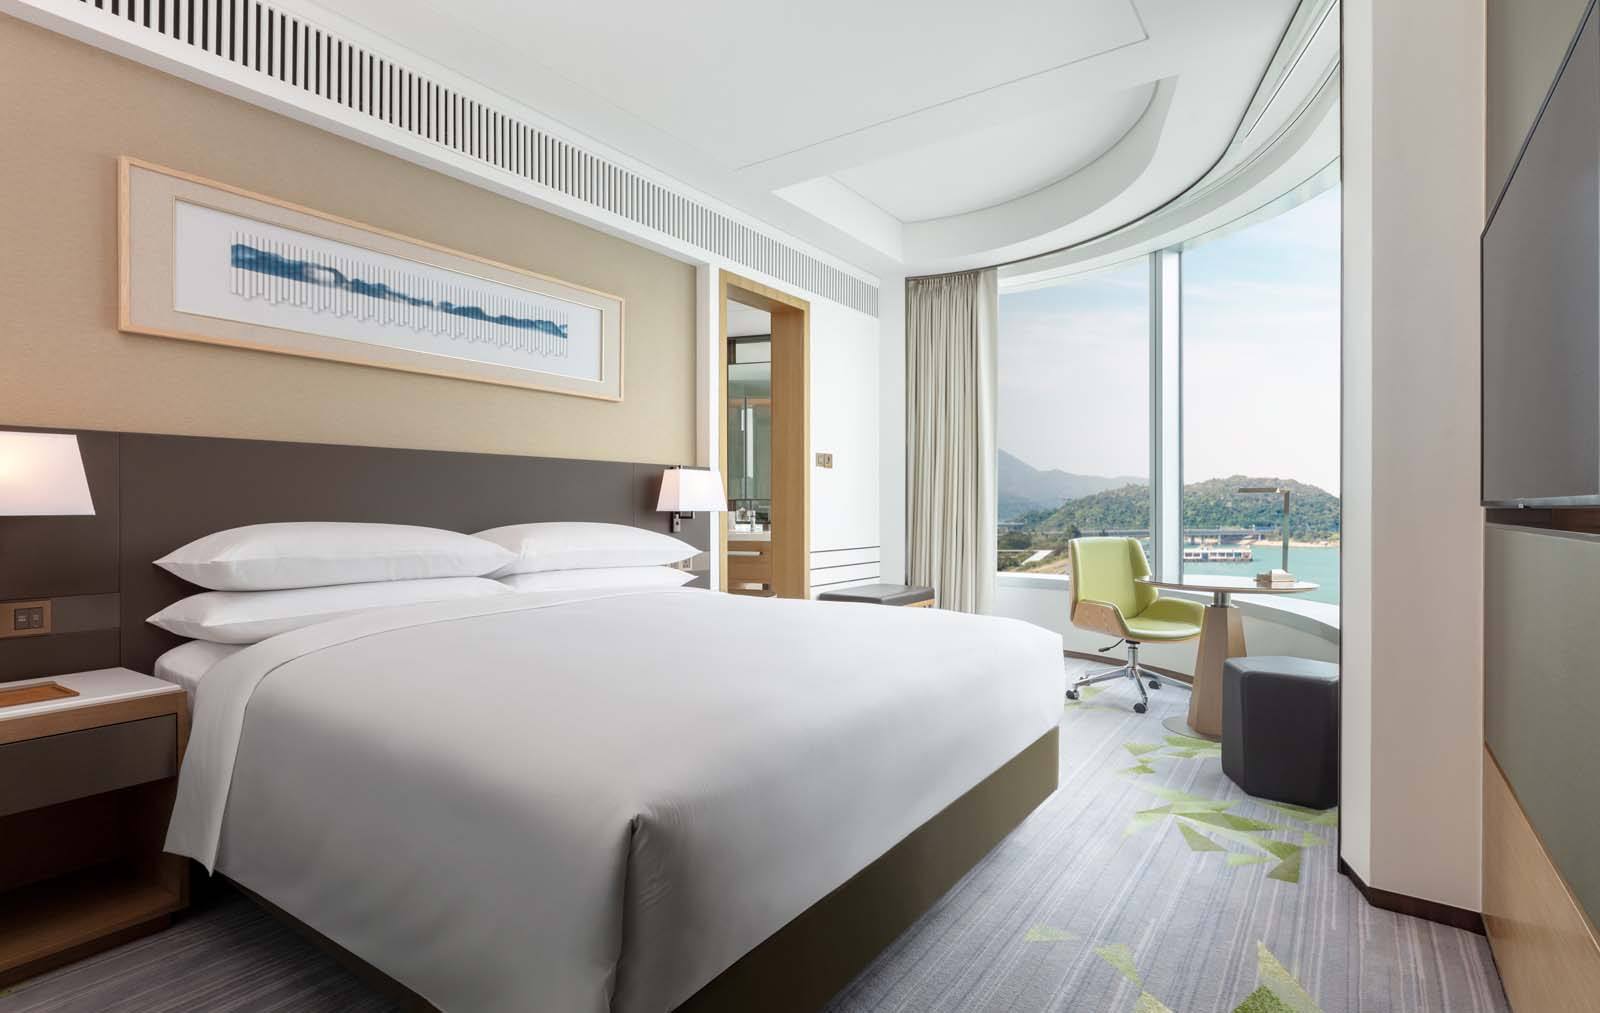 Executive ocean view suite bedroom at the Sheraton Tung Chung, one of the best hotels near Hong Kong airport